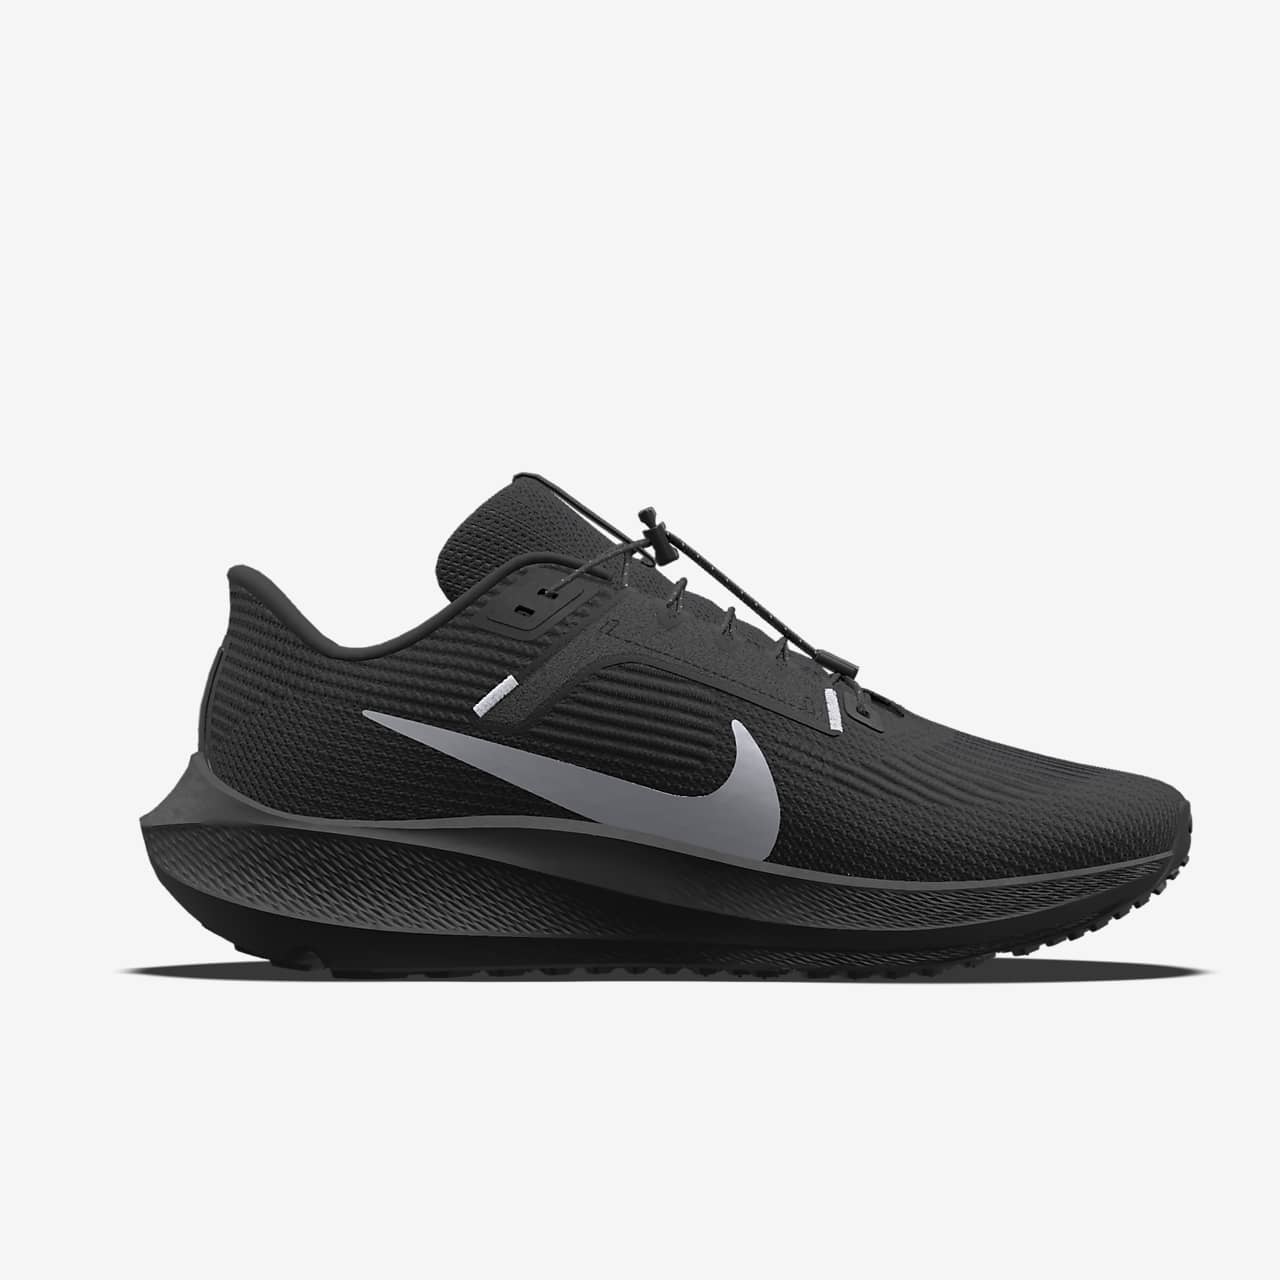 NIKE ペガサス40 BY YOU / 26.0